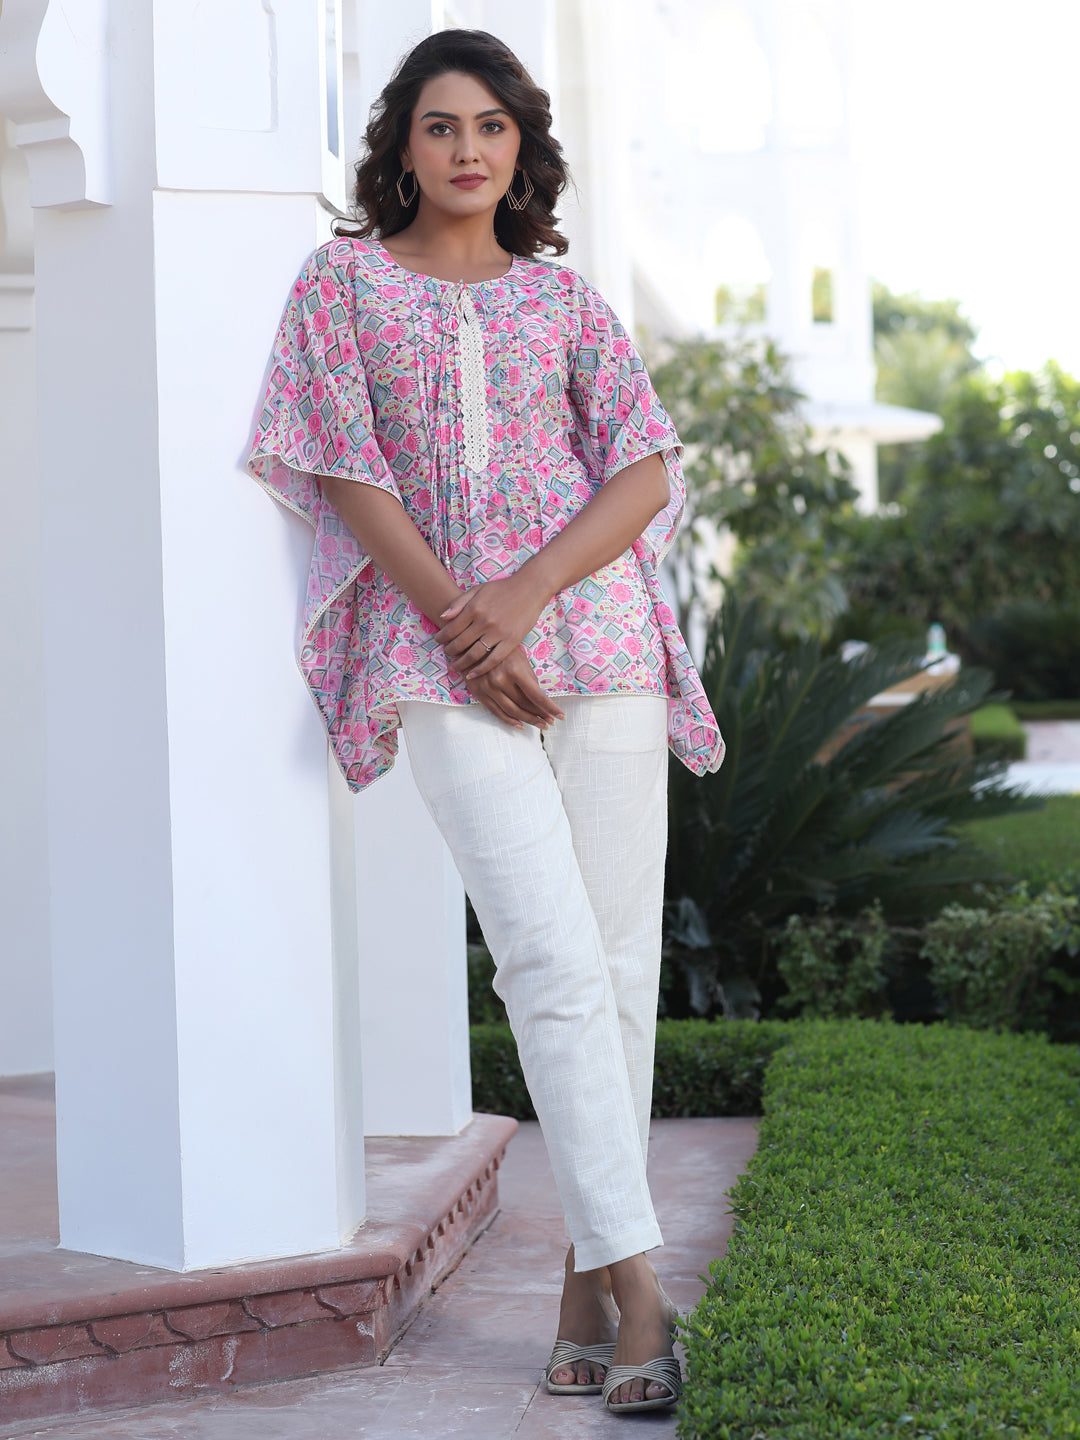 A Pink Geometric Printed Georgette Kaftan Top With Pintucks And Lace Details At The Yoke With Off White Pants